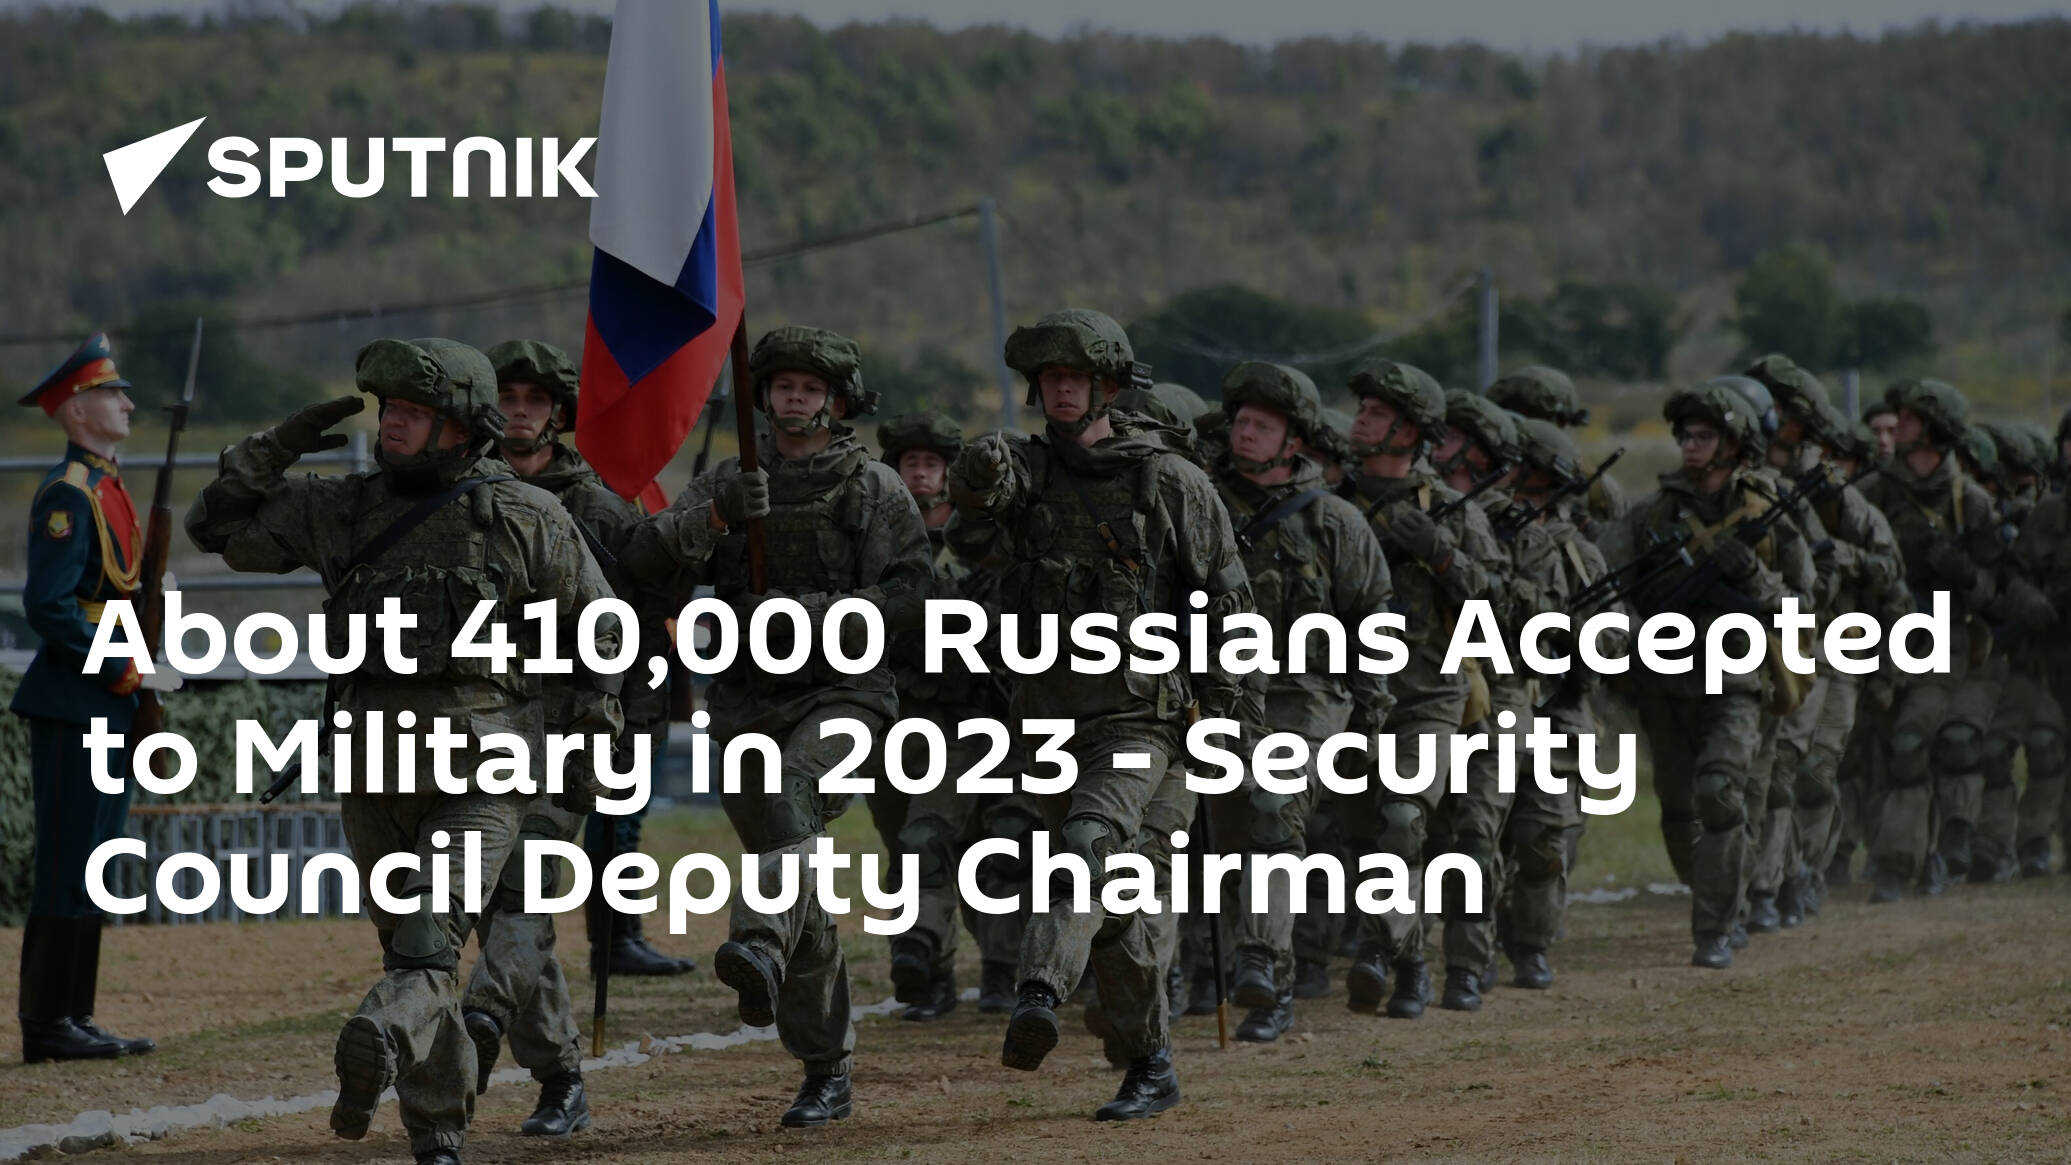 About 410,000 Russians Accepted to Military in 2023 – Security Council Deputy Chairman